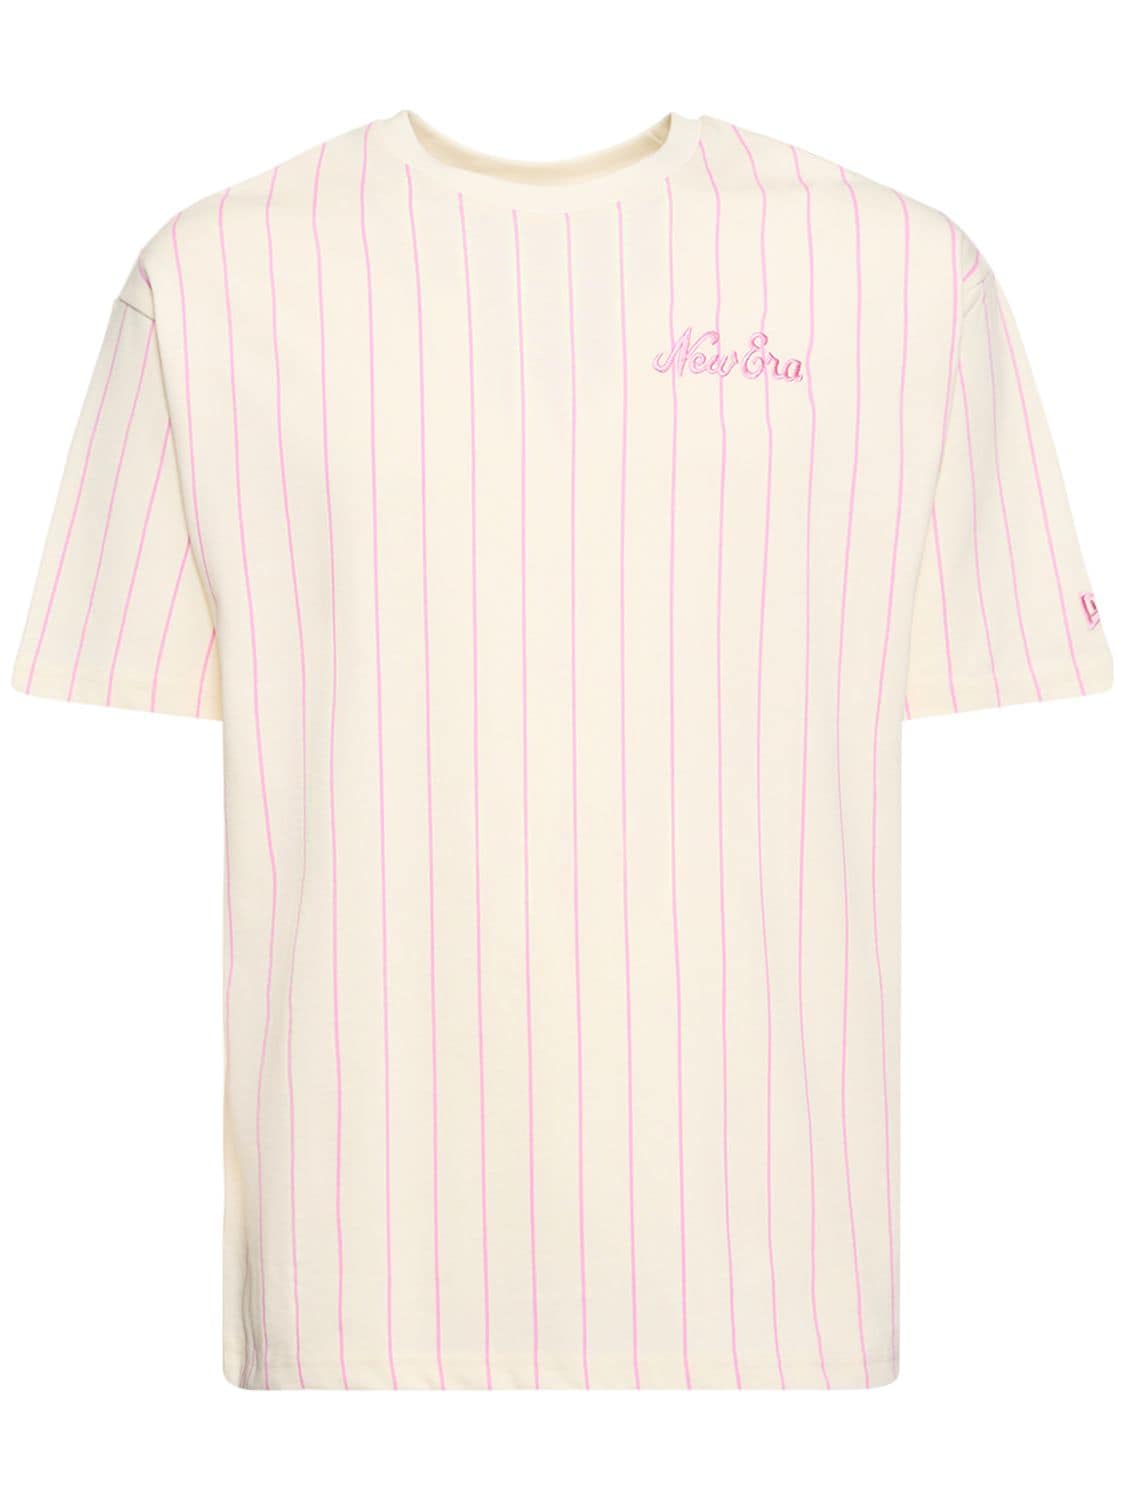 Image of Pinstriped Oversized Cotton T-shirt